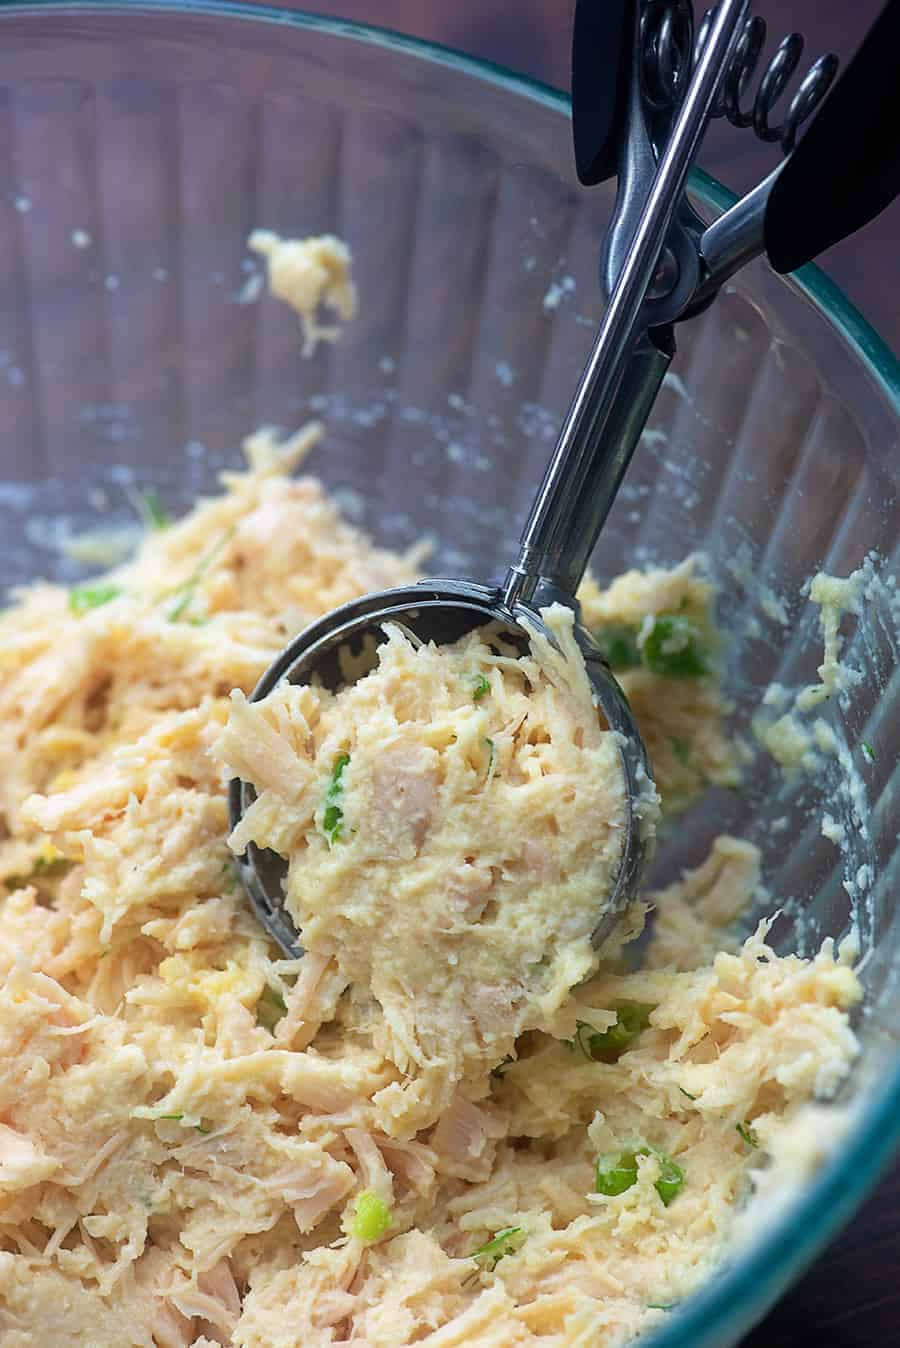 scooping raw chicken patty mixture from a glass bowl